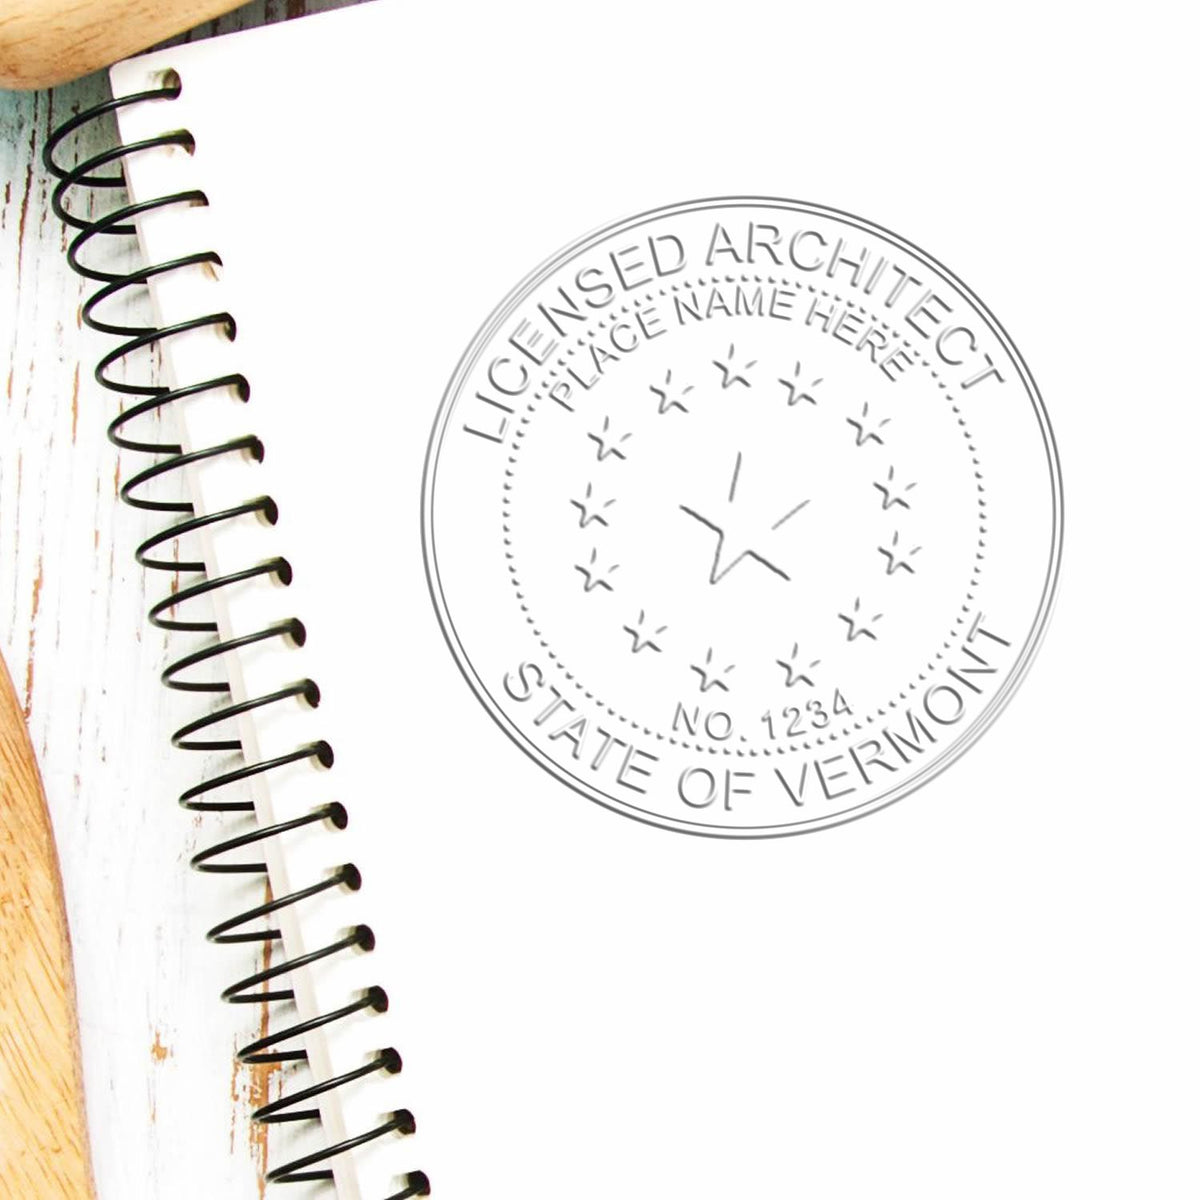 The State of Vermont Long Reach Architectural Embossing Seal stamp impression comes to life with a crisp, detailed photo on paper - showcasing true professional quality.